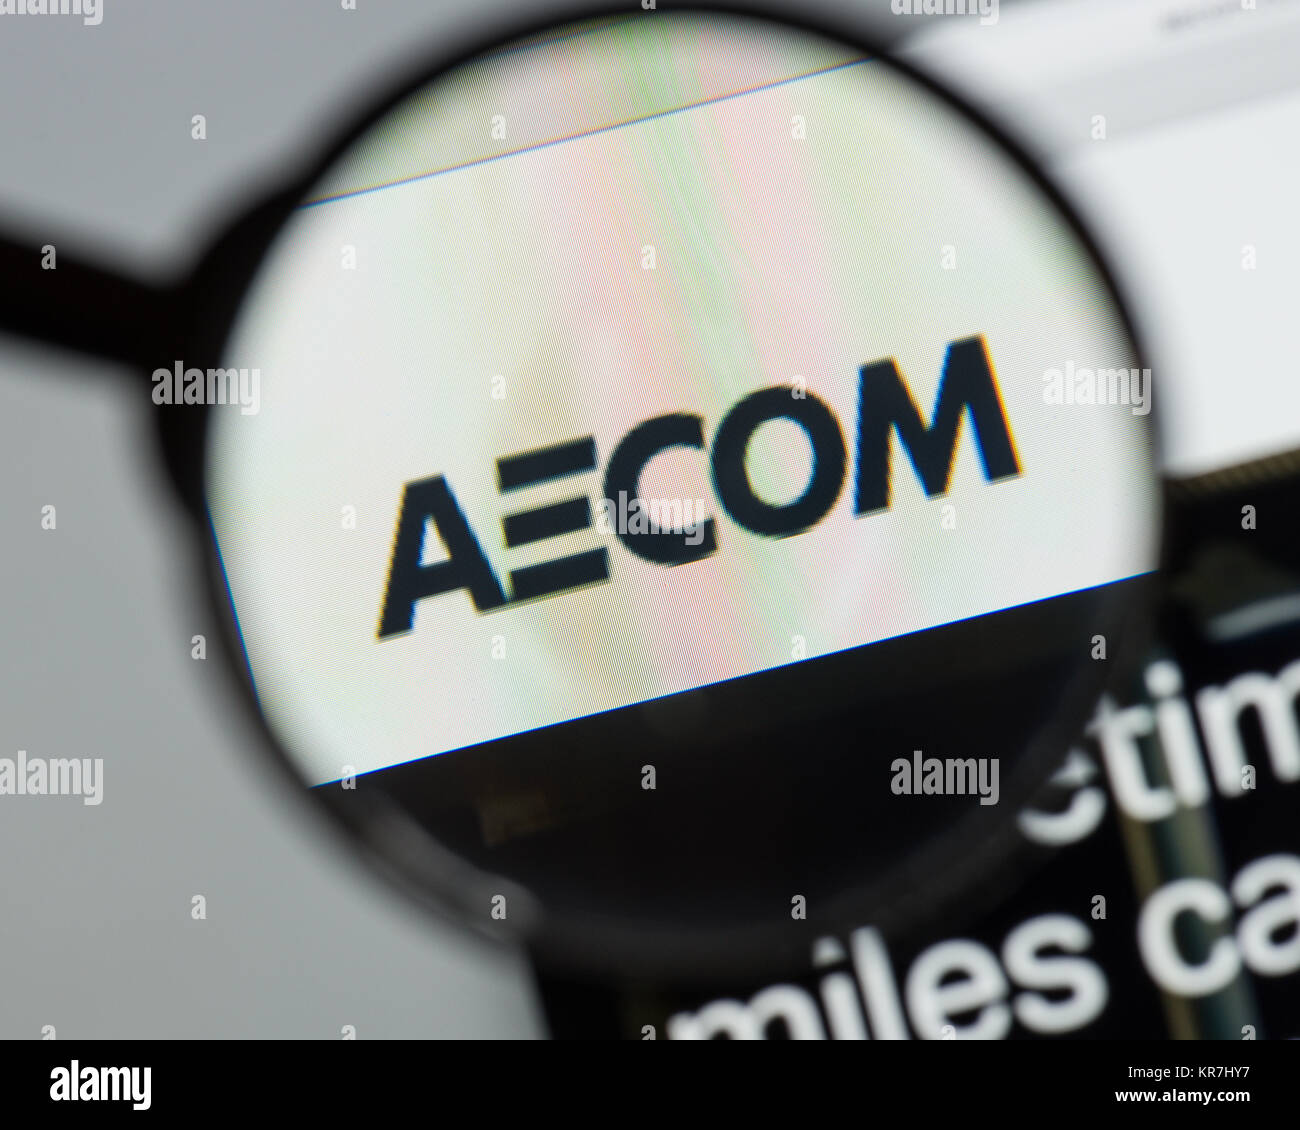 Milan, Italy - August 10, 2017: AECOM website homepage. It is an American multinational engineering firm. AECOM logo visible. Stock Photo